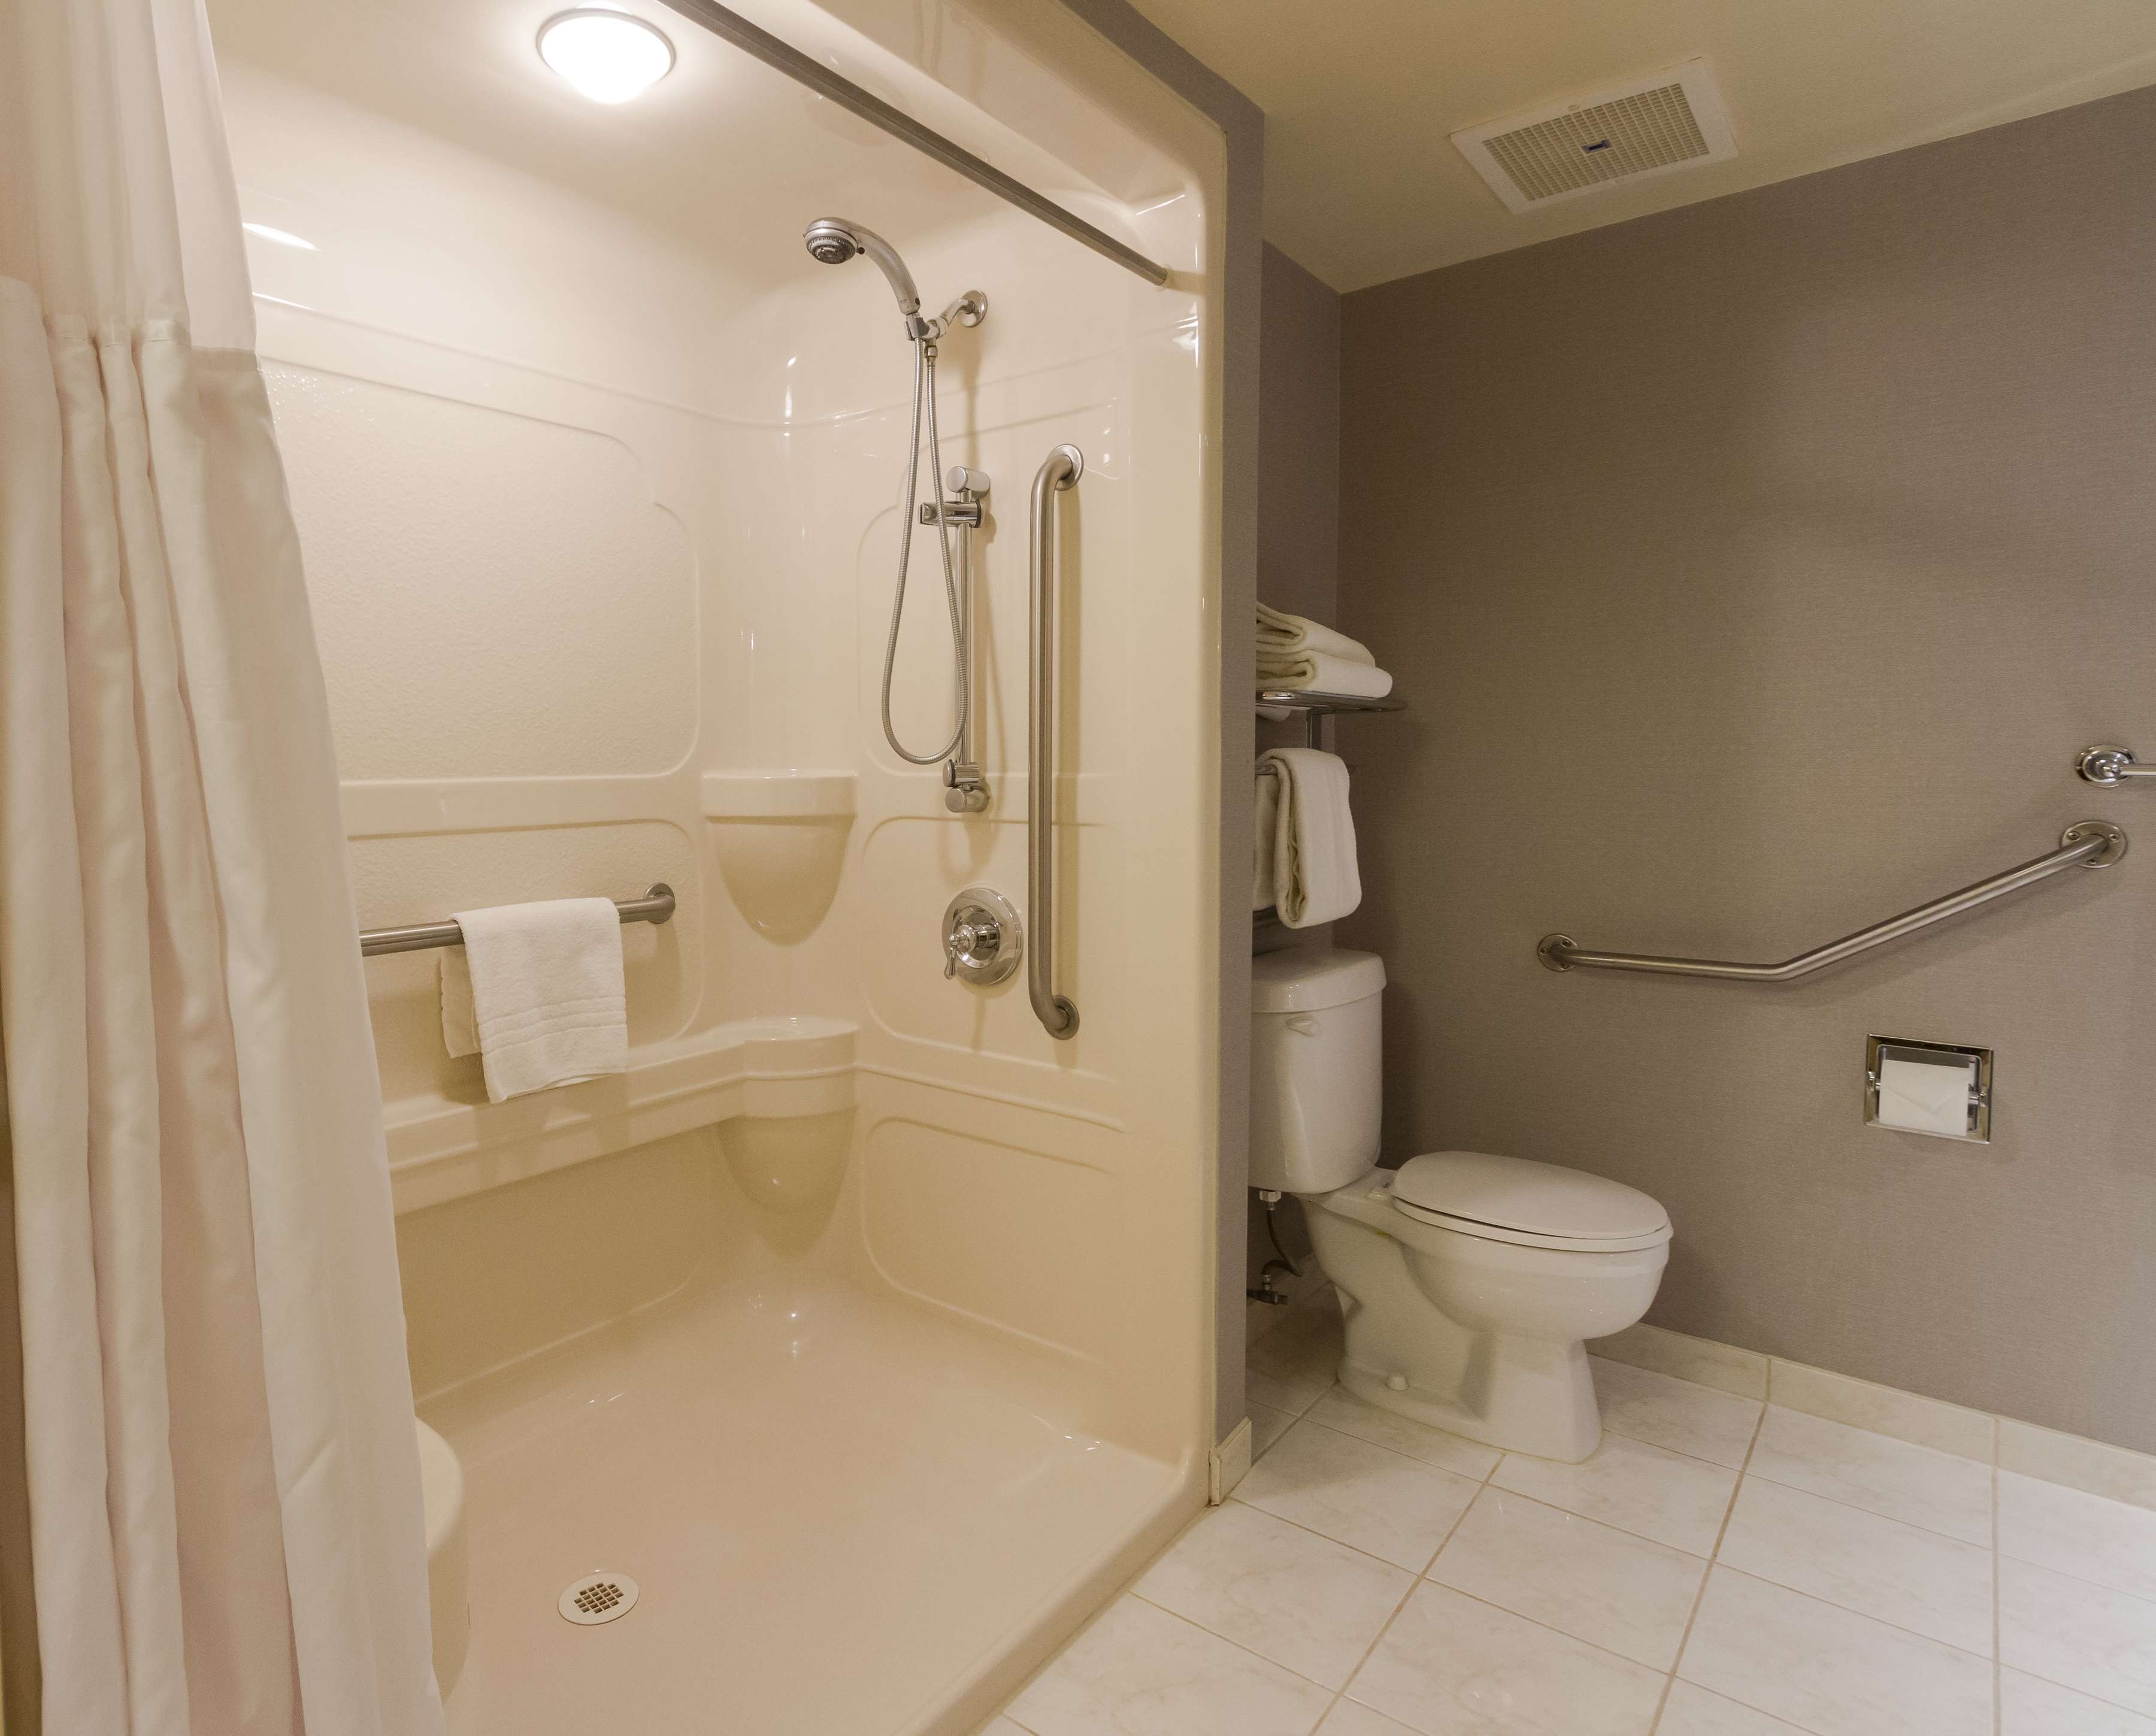 Mobility Accessible King Bathroom Best Western Plus The Arden Park Hotel Stratford (519)275-2936